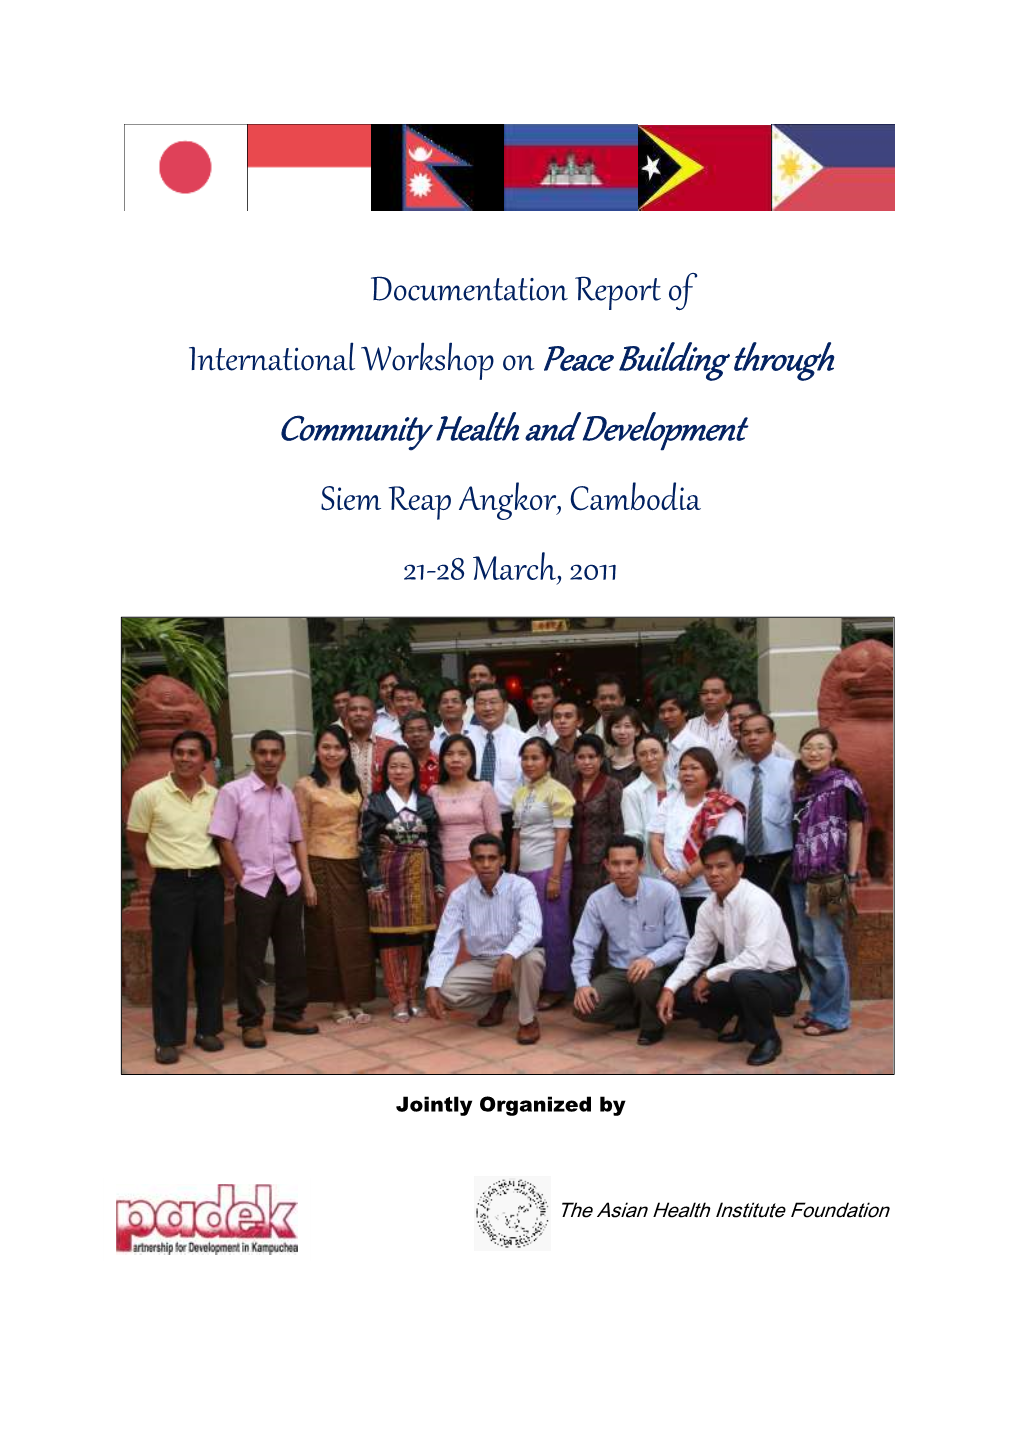 IWS on Peace Building Through Community Health And